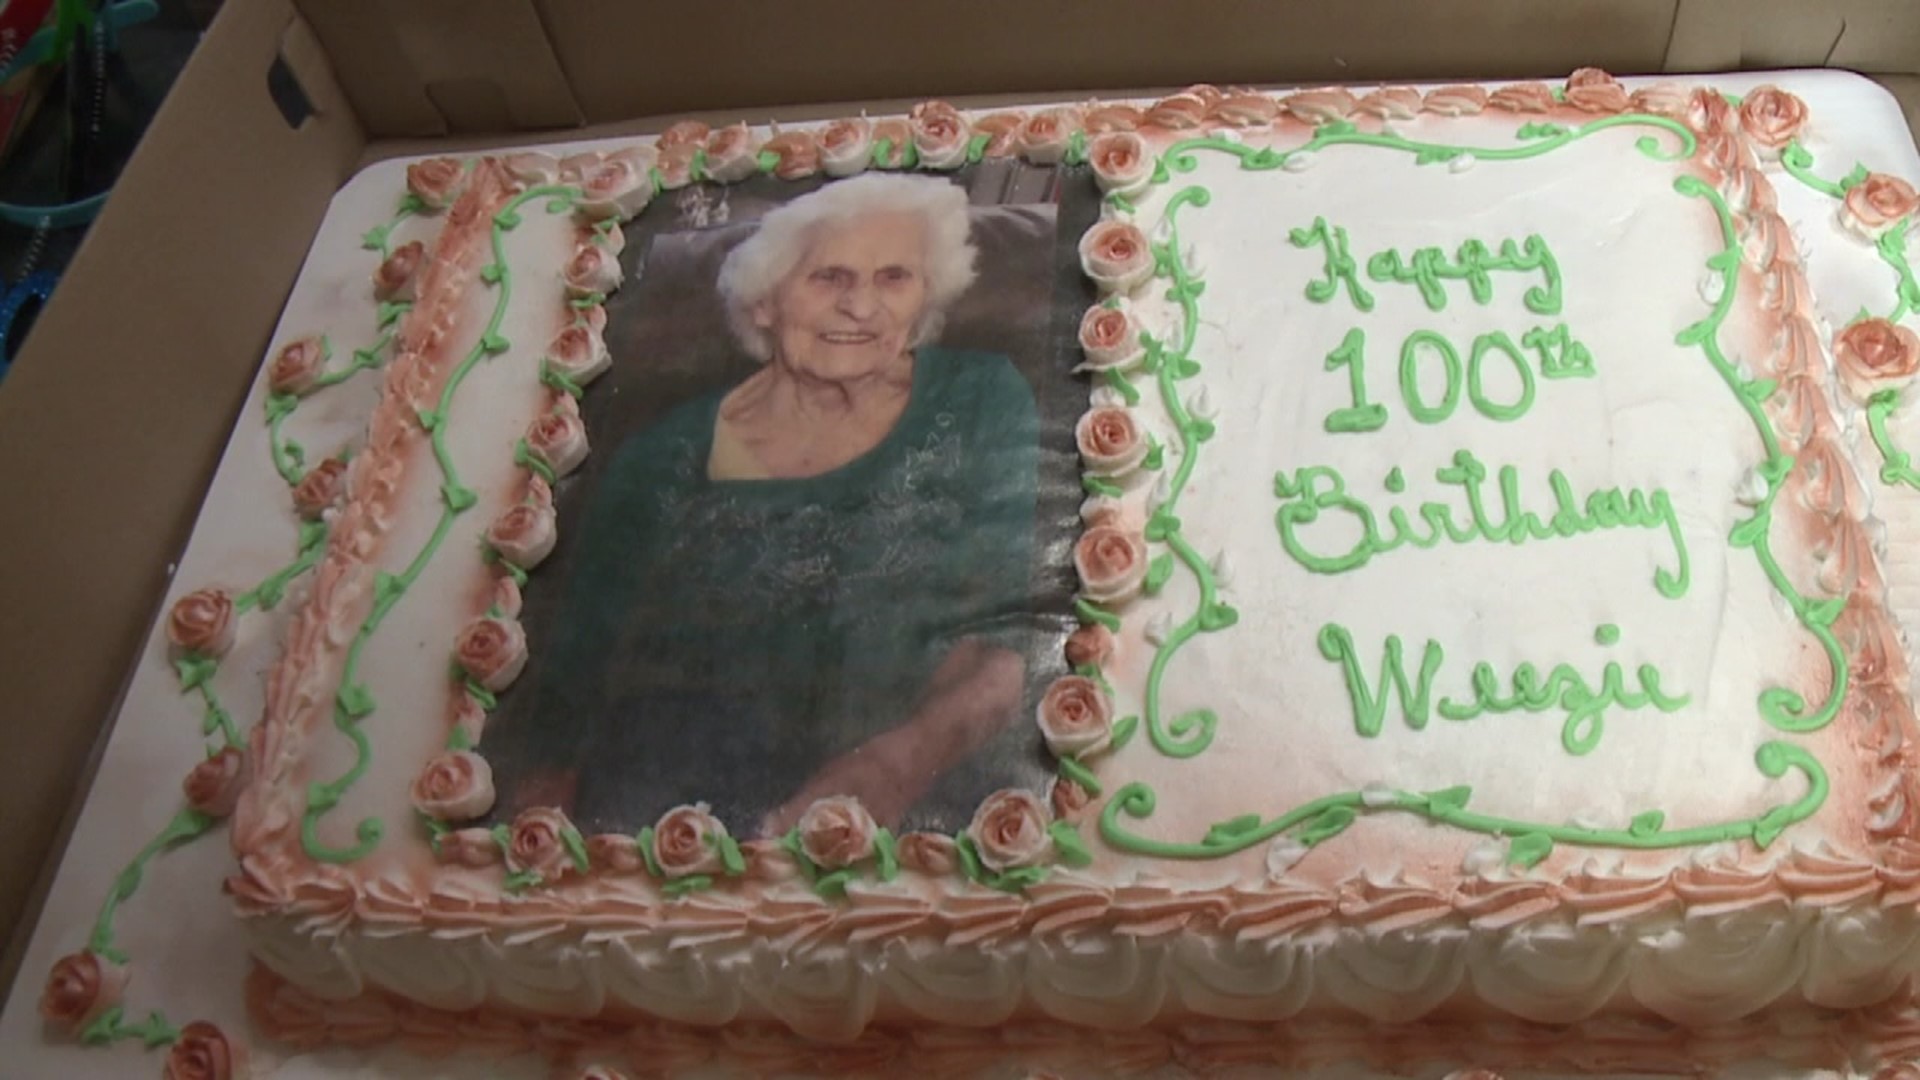 After battling COVID on her 99th birthday, Louise Johnson was able to celebrate her milestone properly.